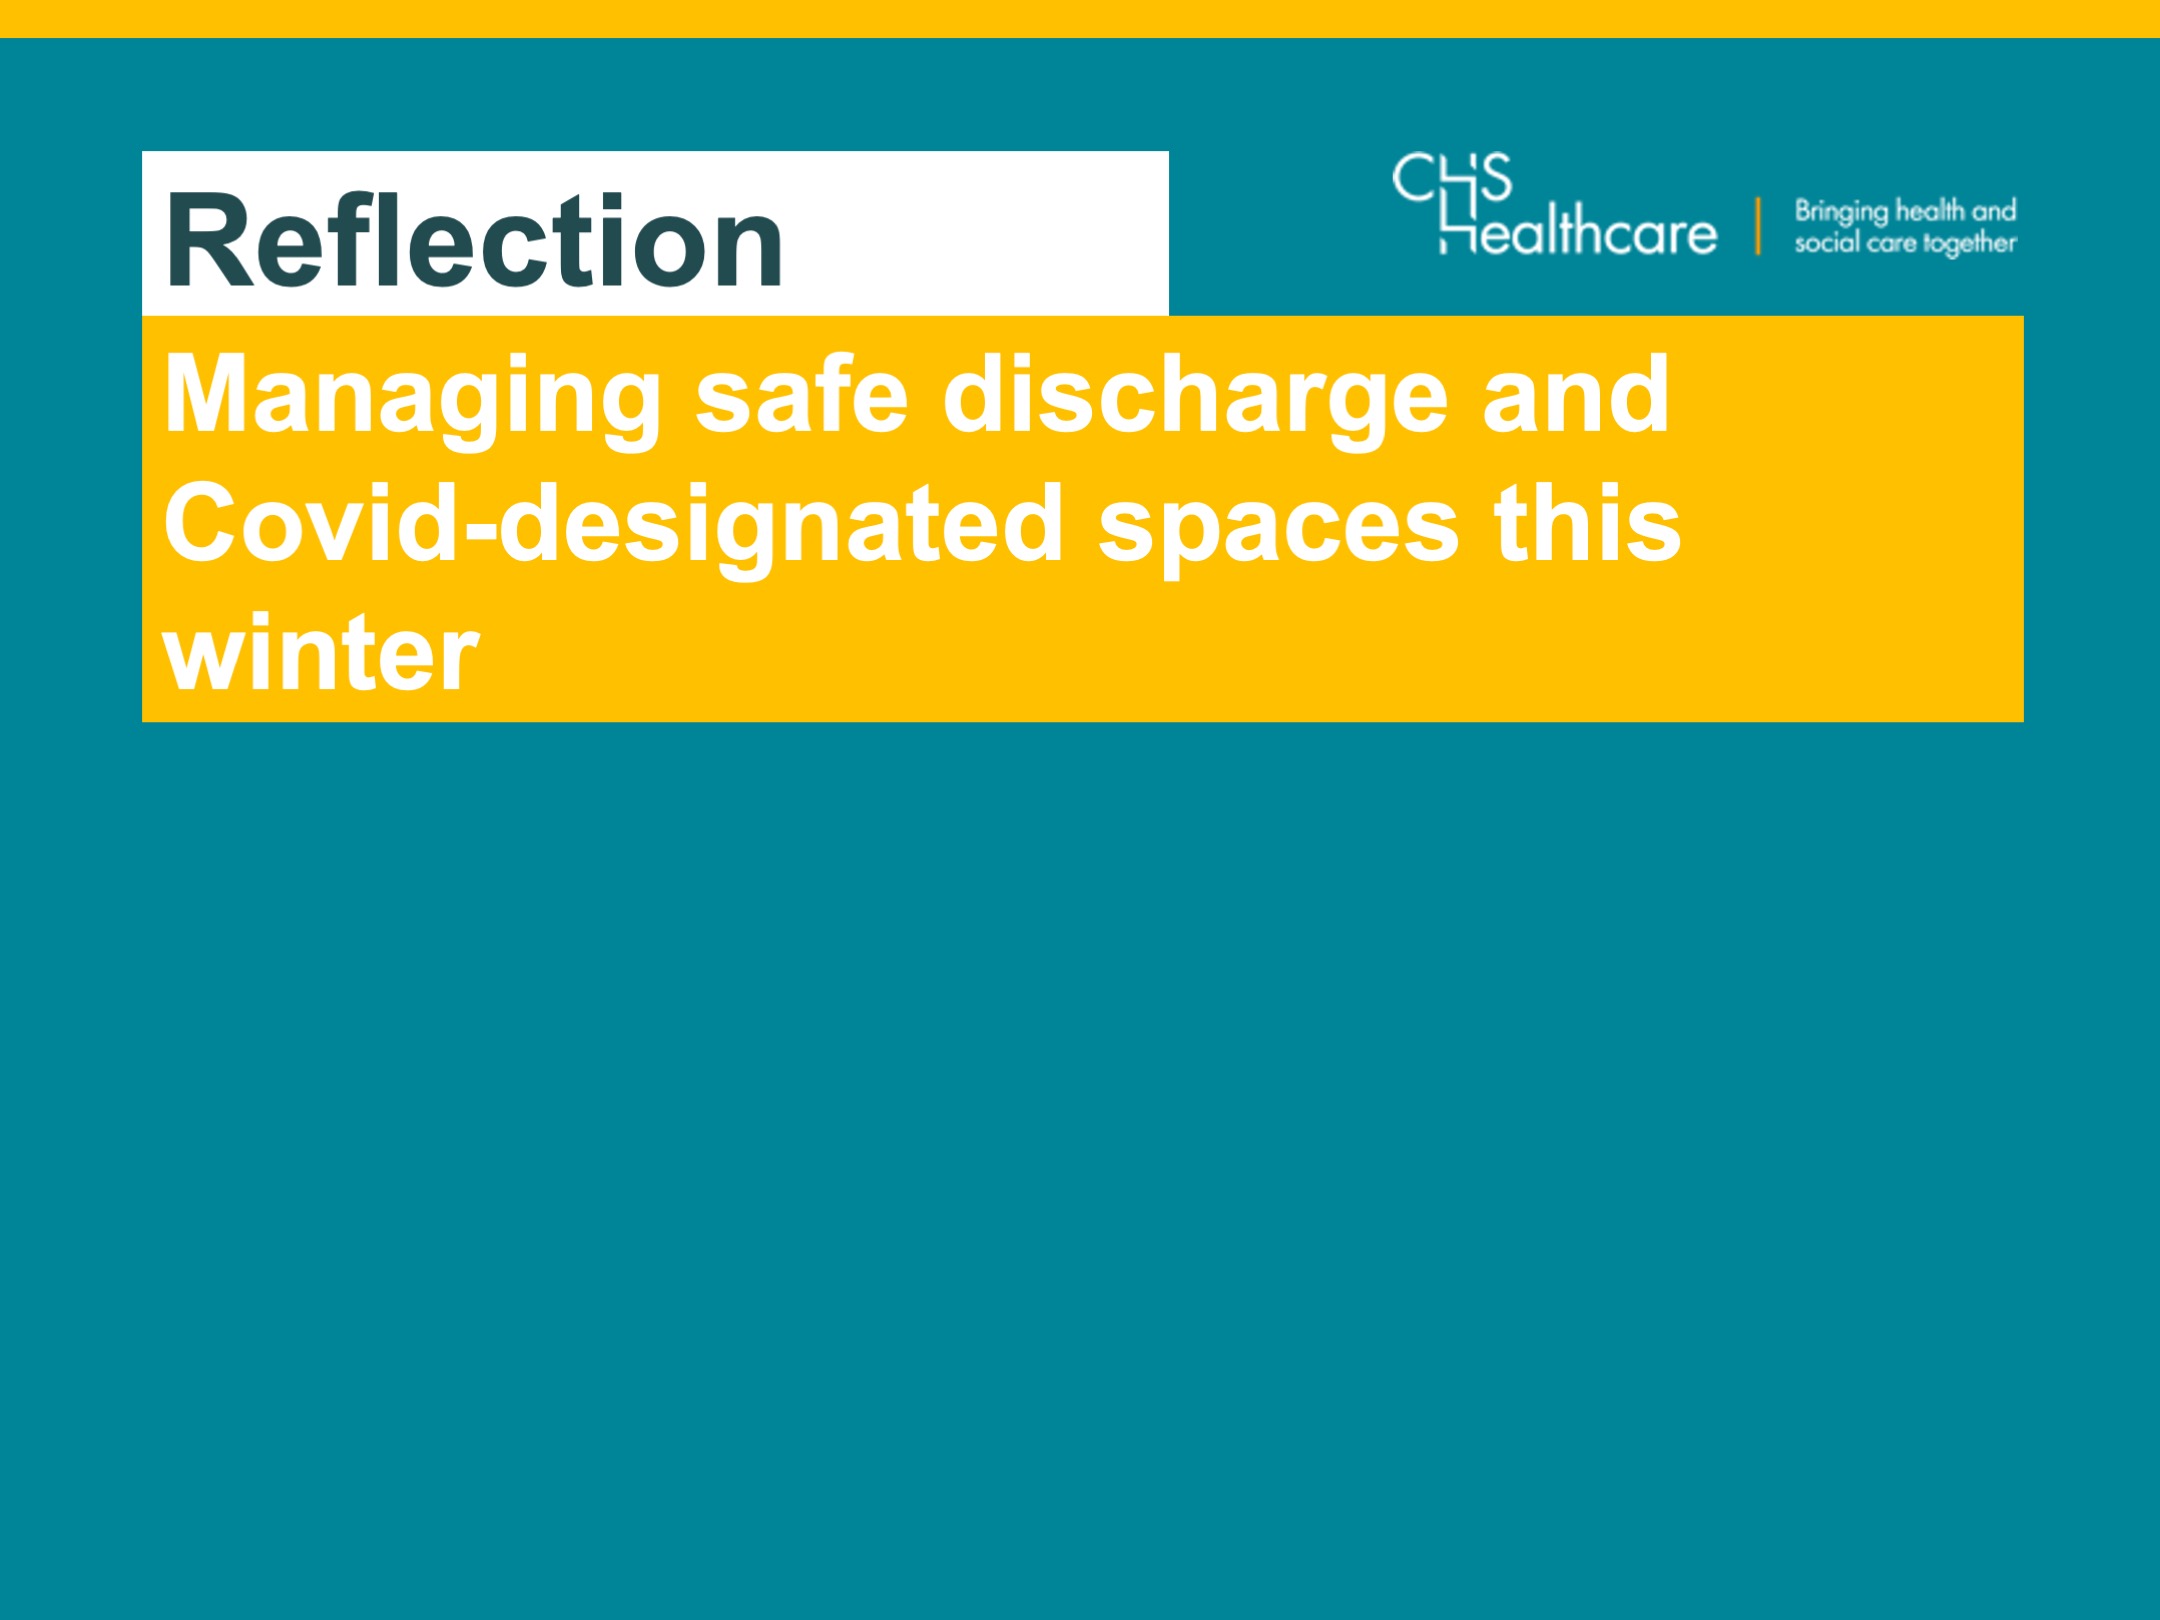 Managing safe discharge and Covid-designated spaces this winter